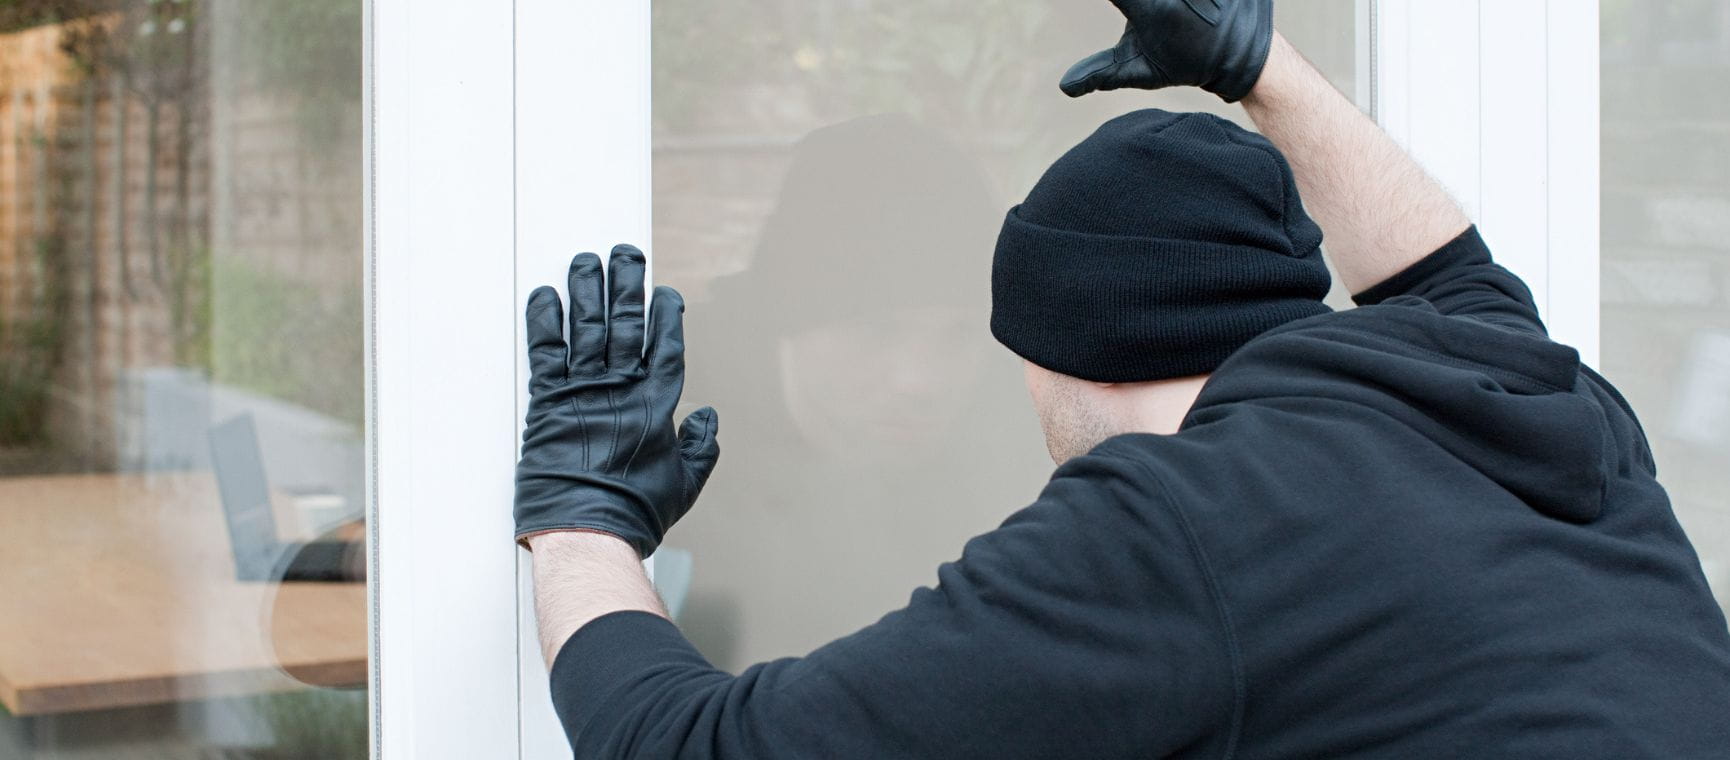 A burglar dressed in black peering through patio doors at a laptop on a table inside